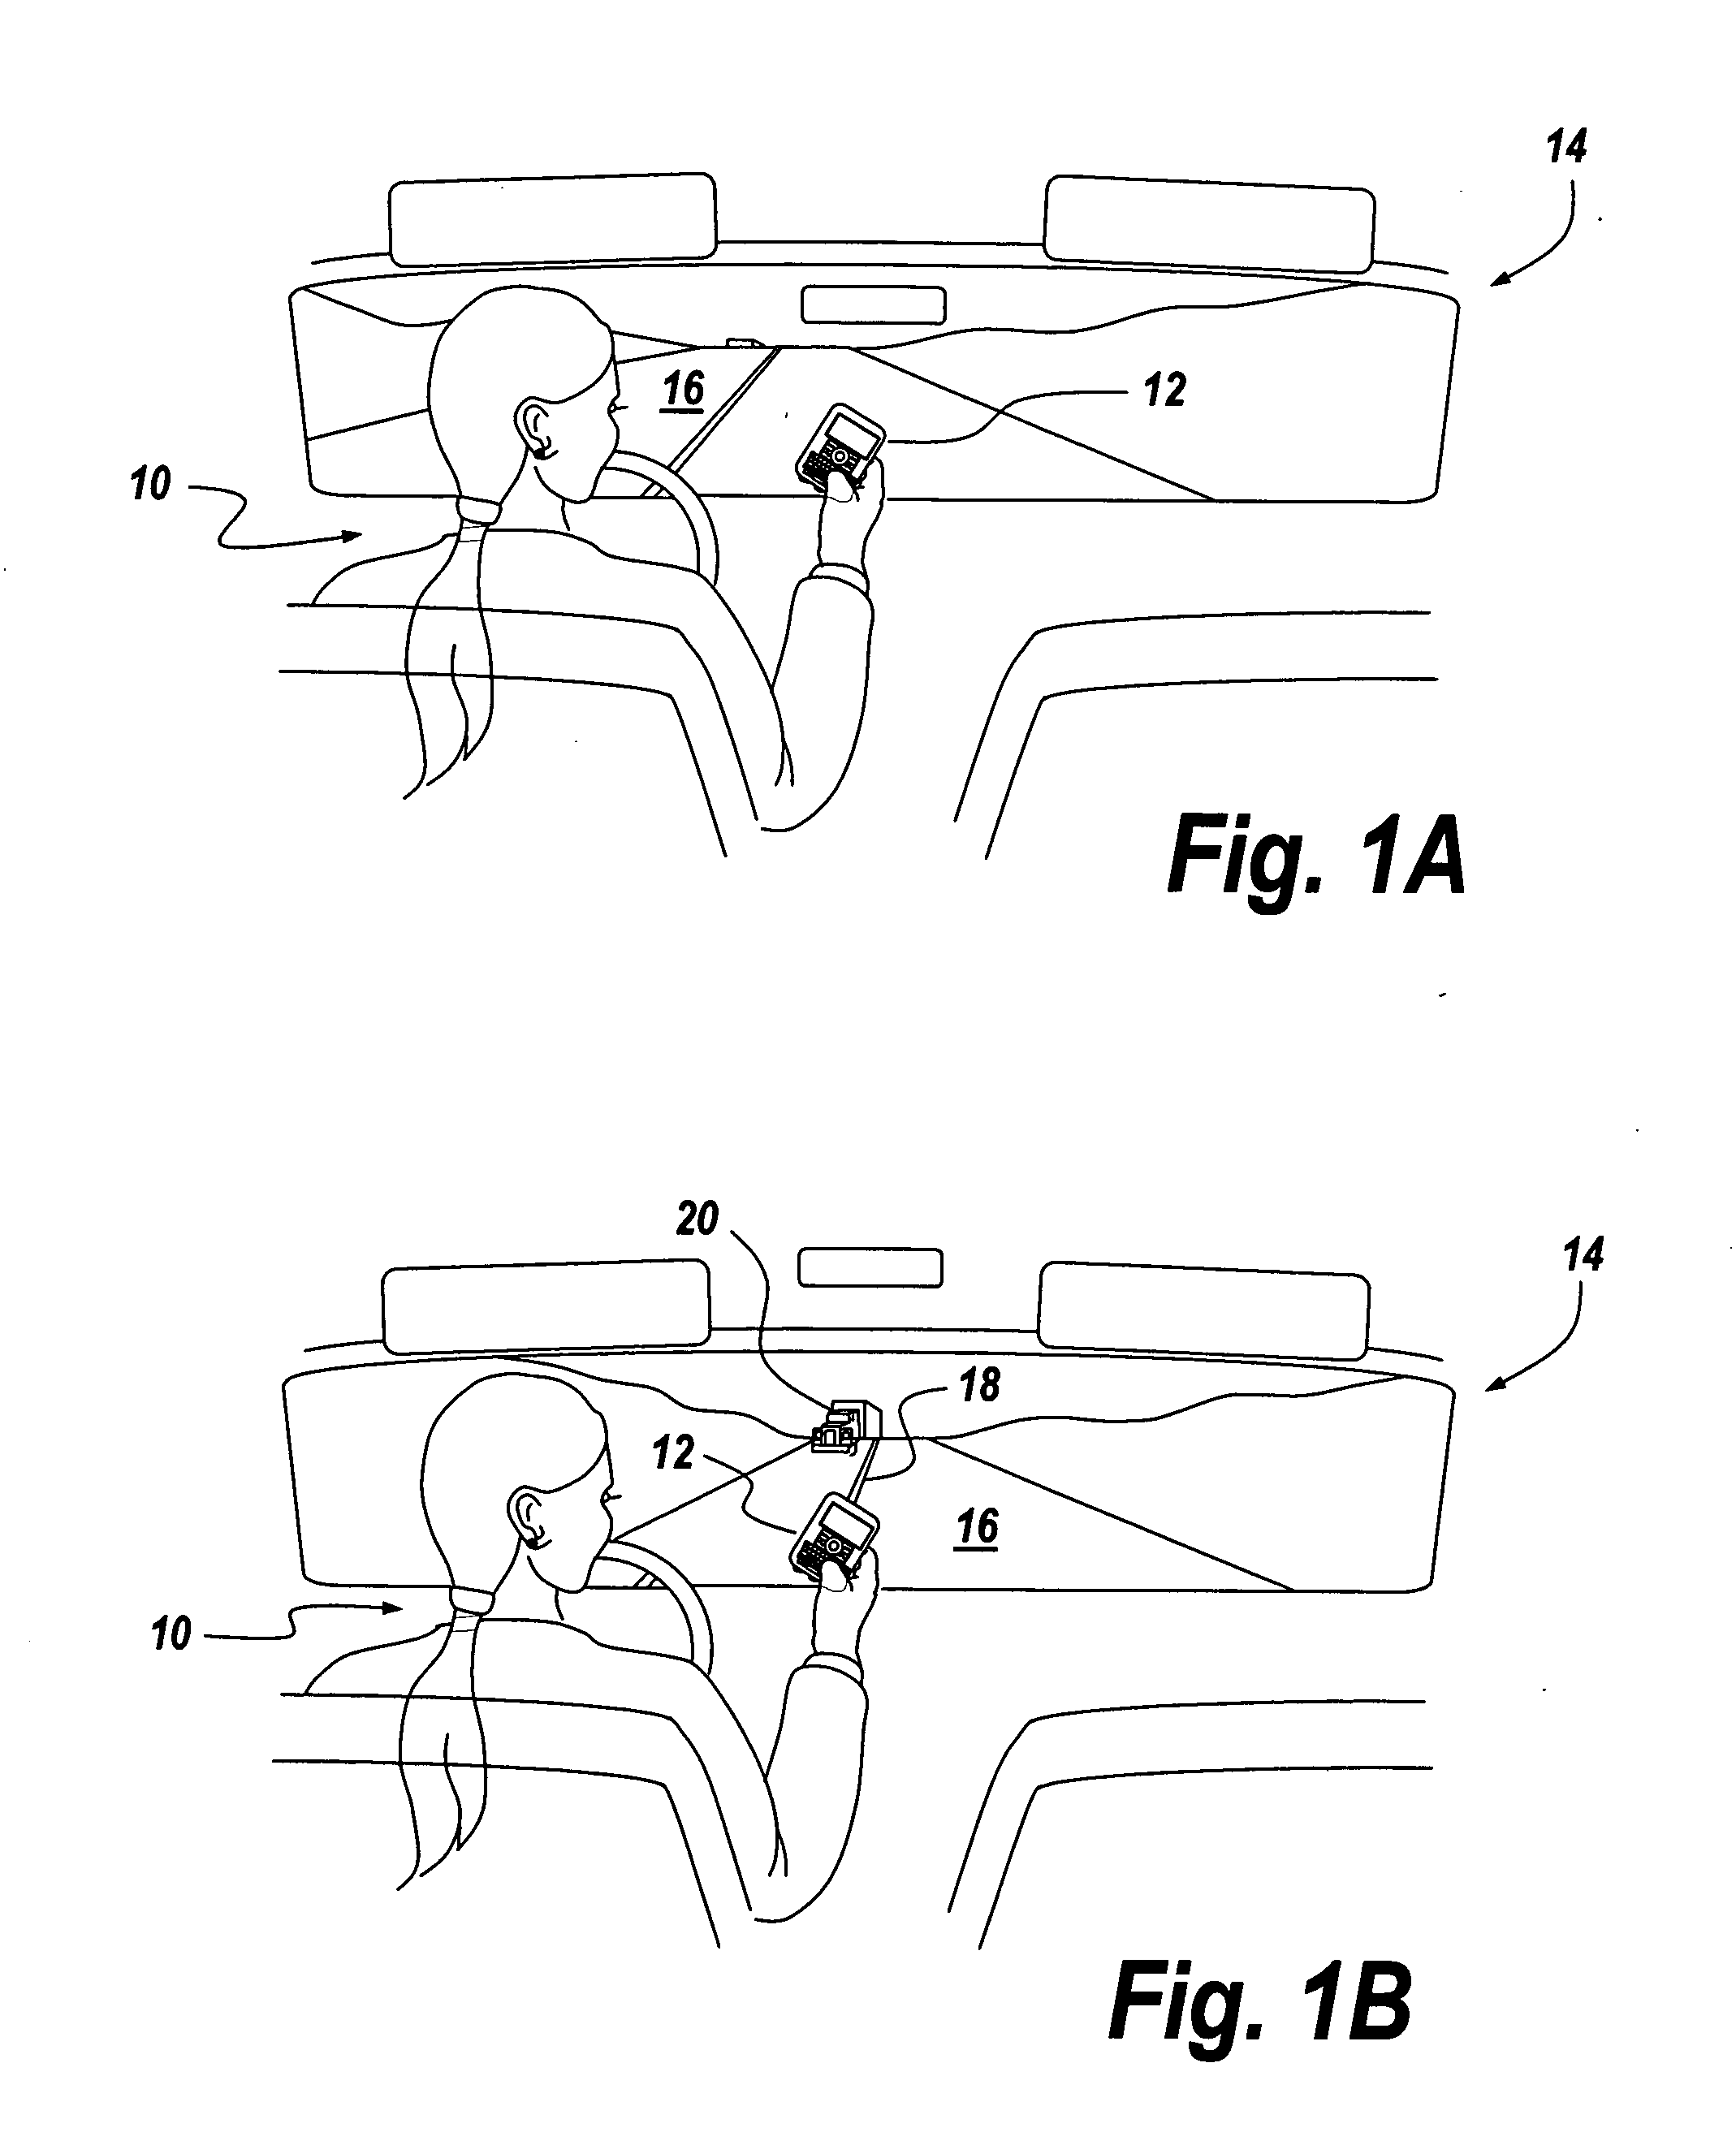 Method and apparatus for combating distracted driving